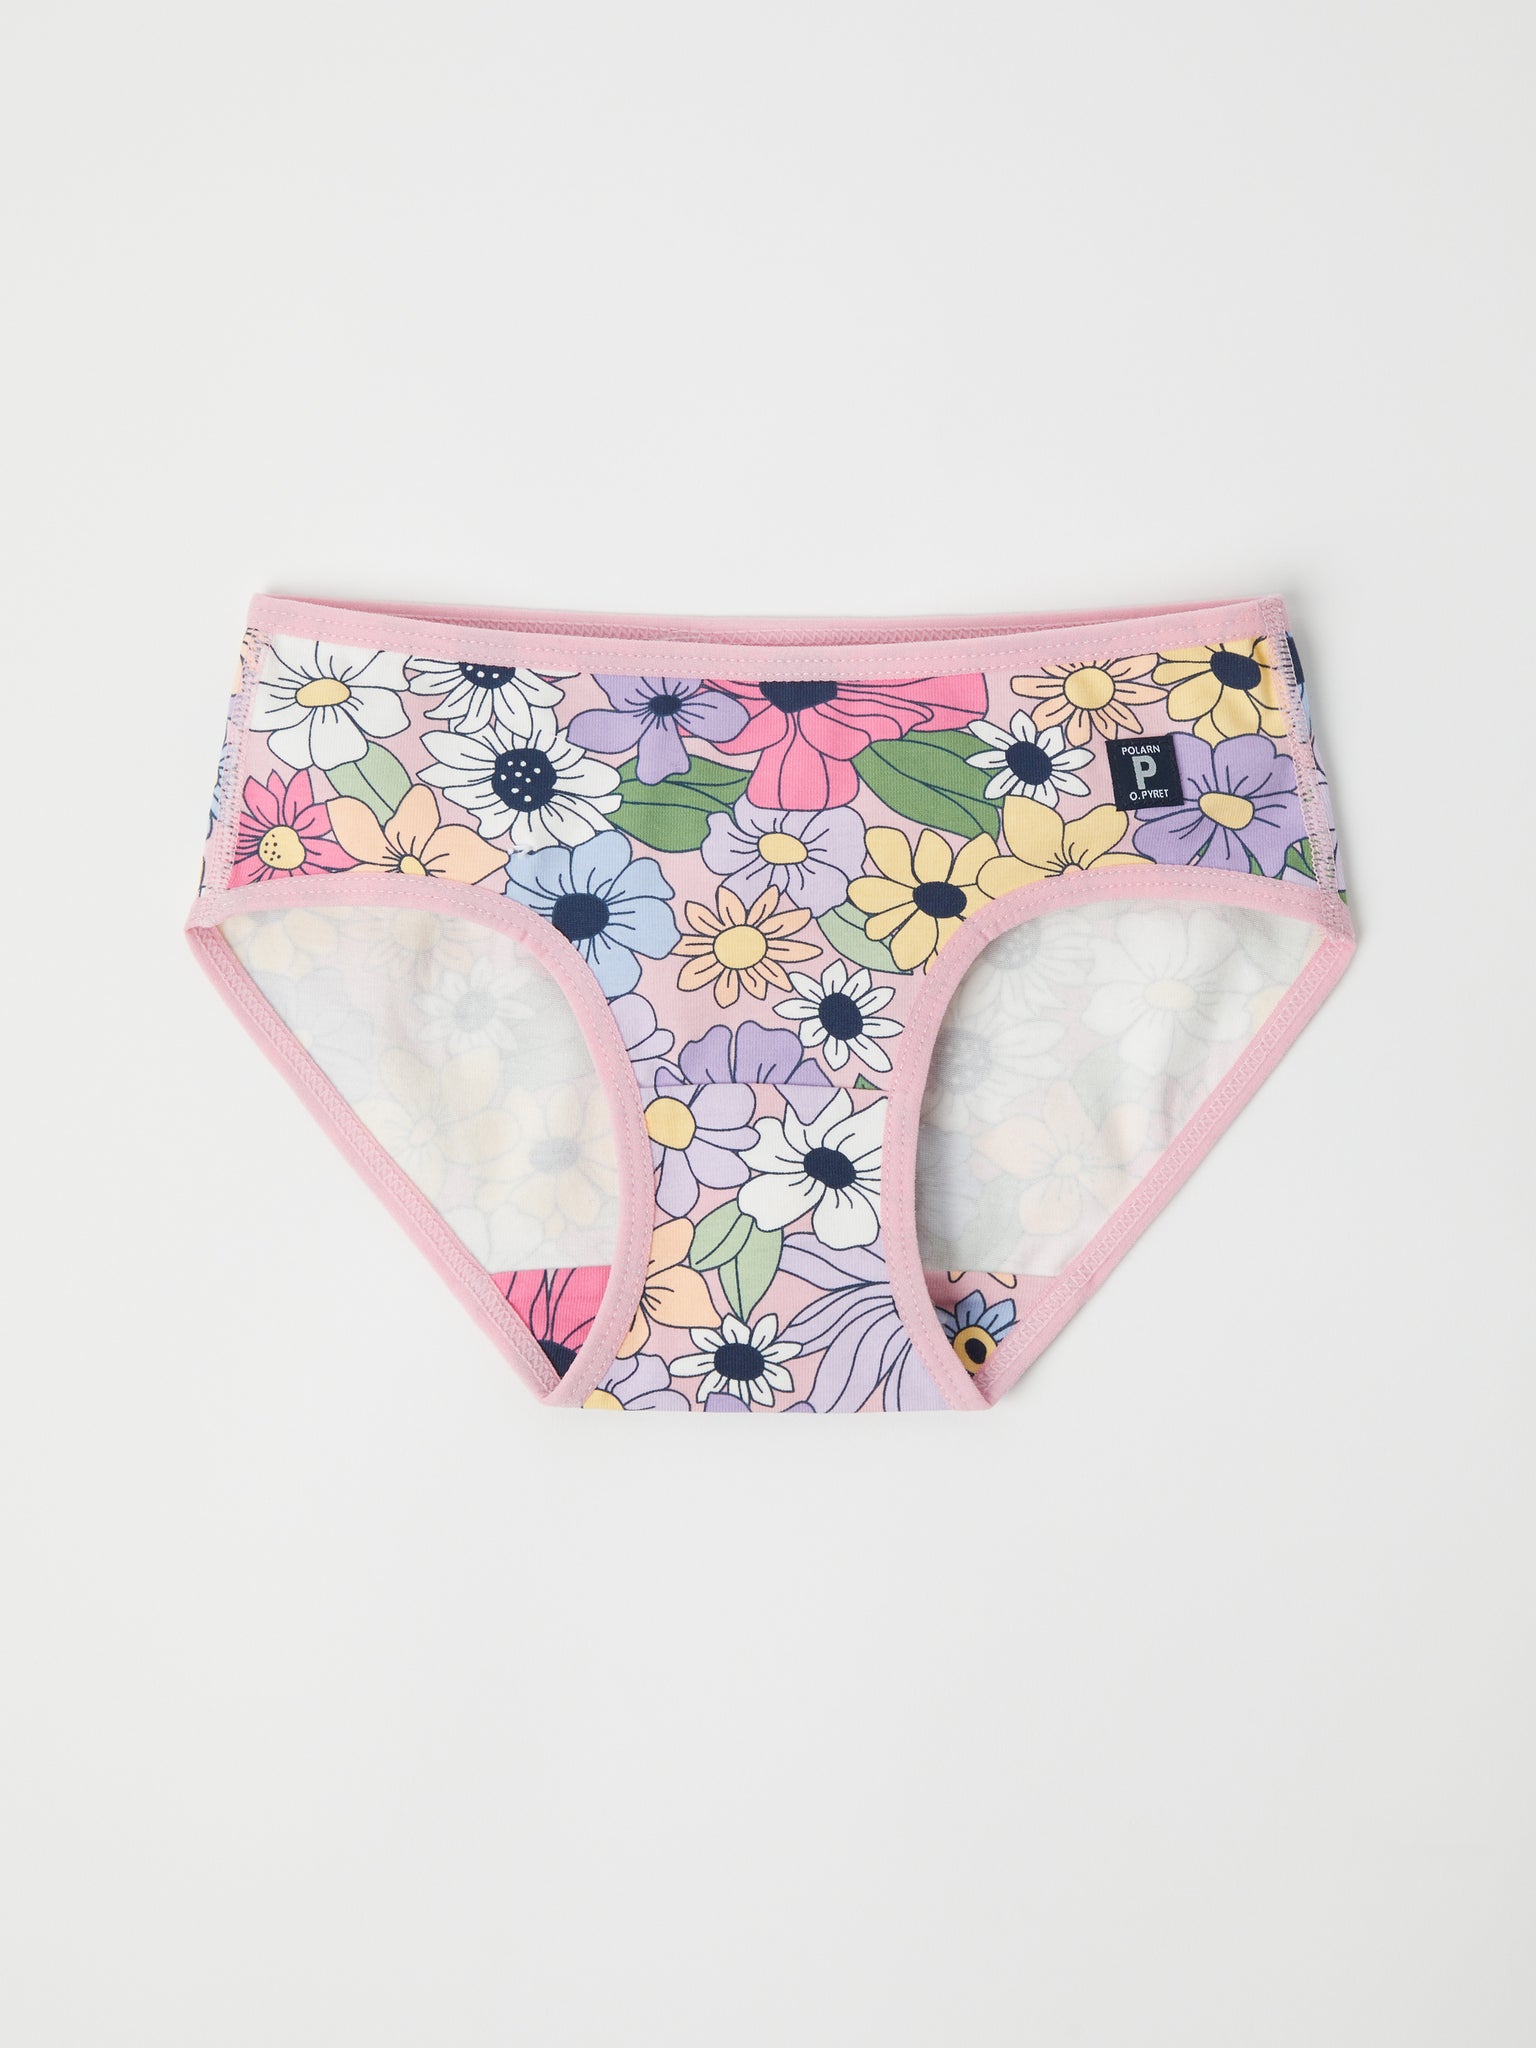 Organic Floral Print Girls Briefs from the Polarn O. Pyret kidswear collection. Ethically produced kids clothing.